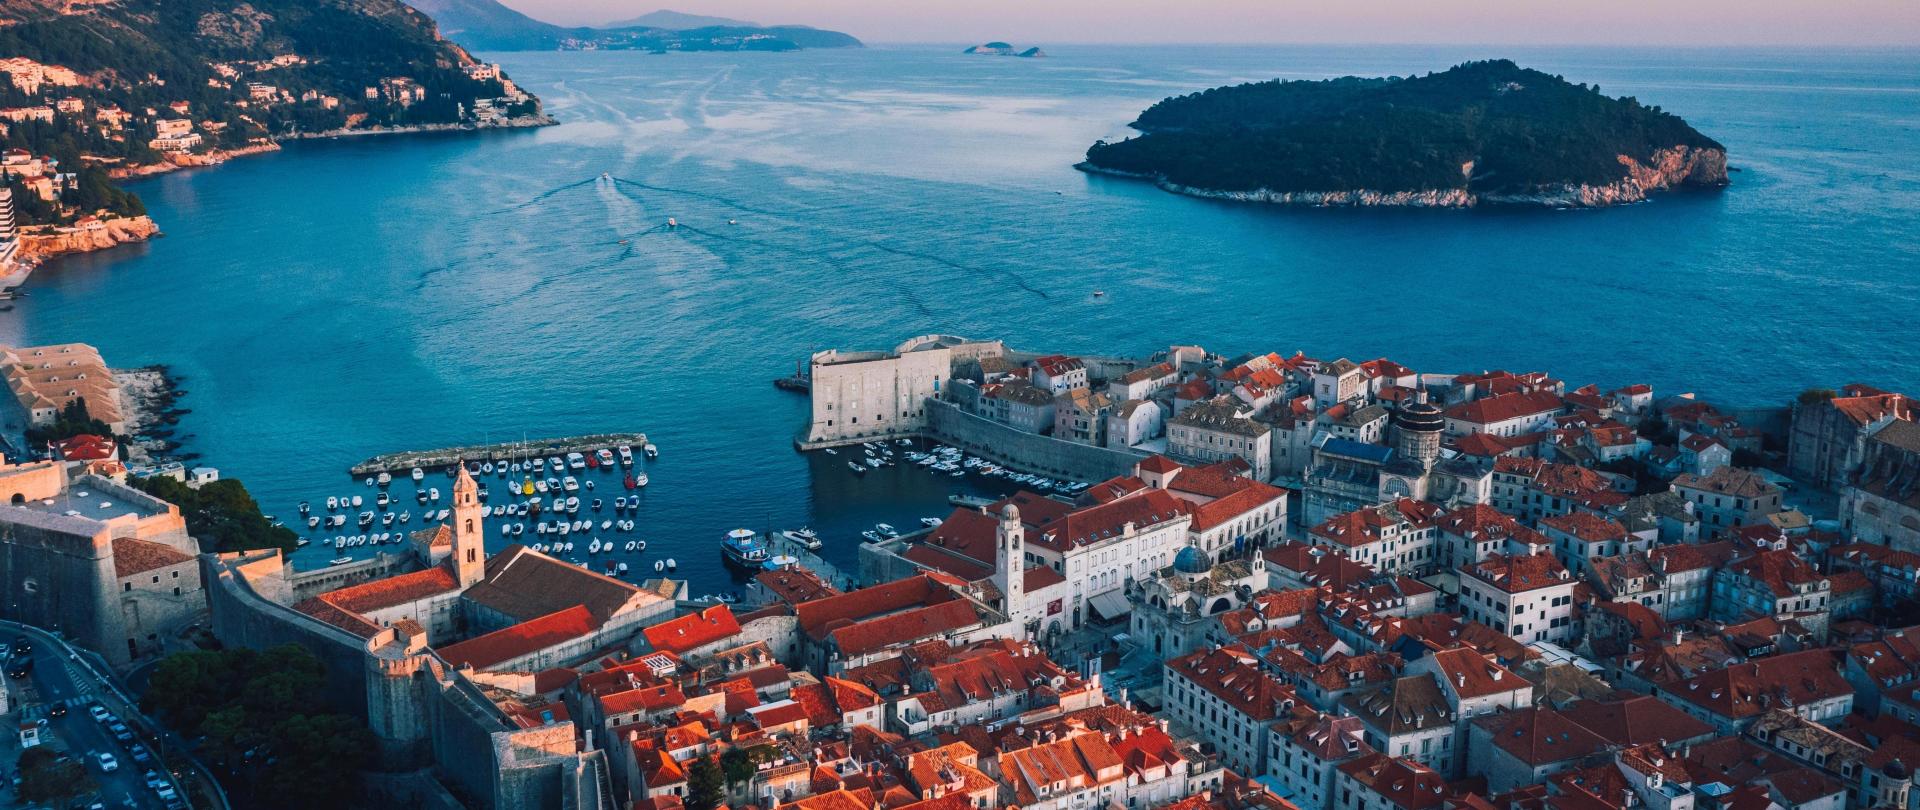 Aerial View of a City and Island Croatia